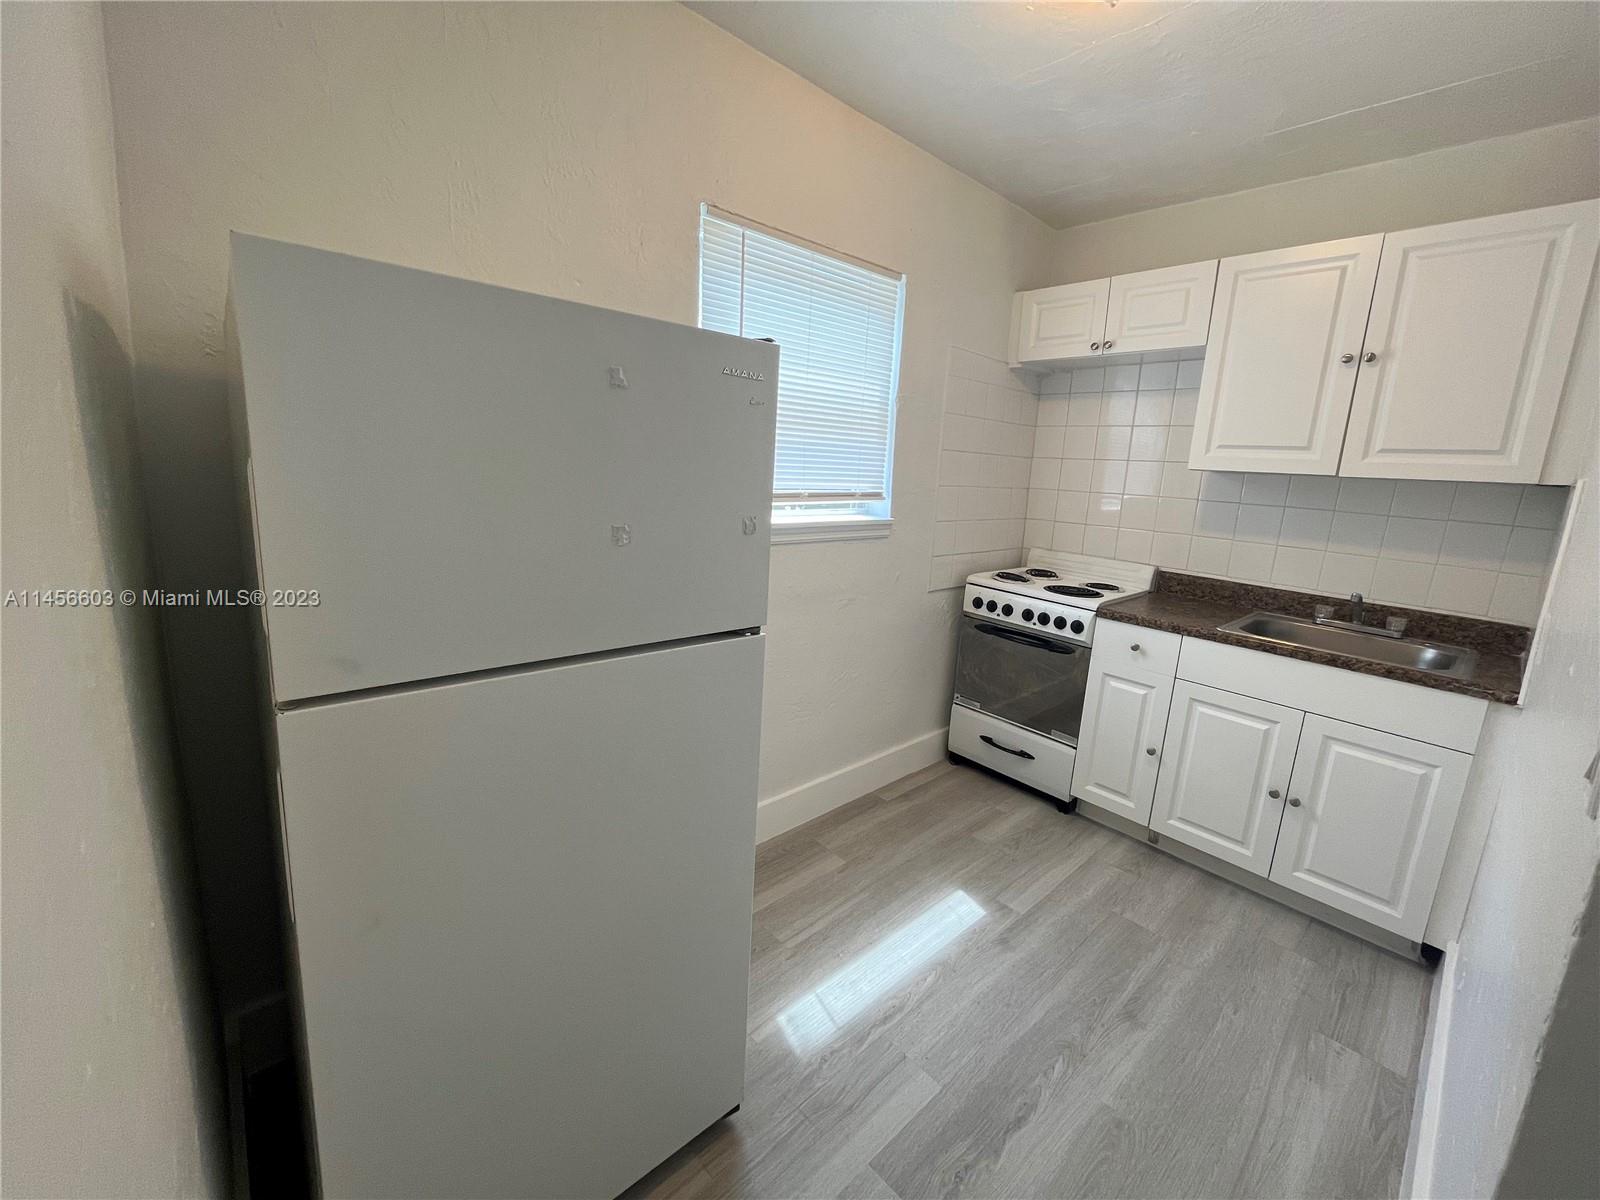 Lovely freshly renovated centrally located 1 bed/1 bath apartment in Coconut Grove near the Douglas Metro rail station and other public transportation. Fast approvals. NO HOA. Don't miss this opportunity.!.